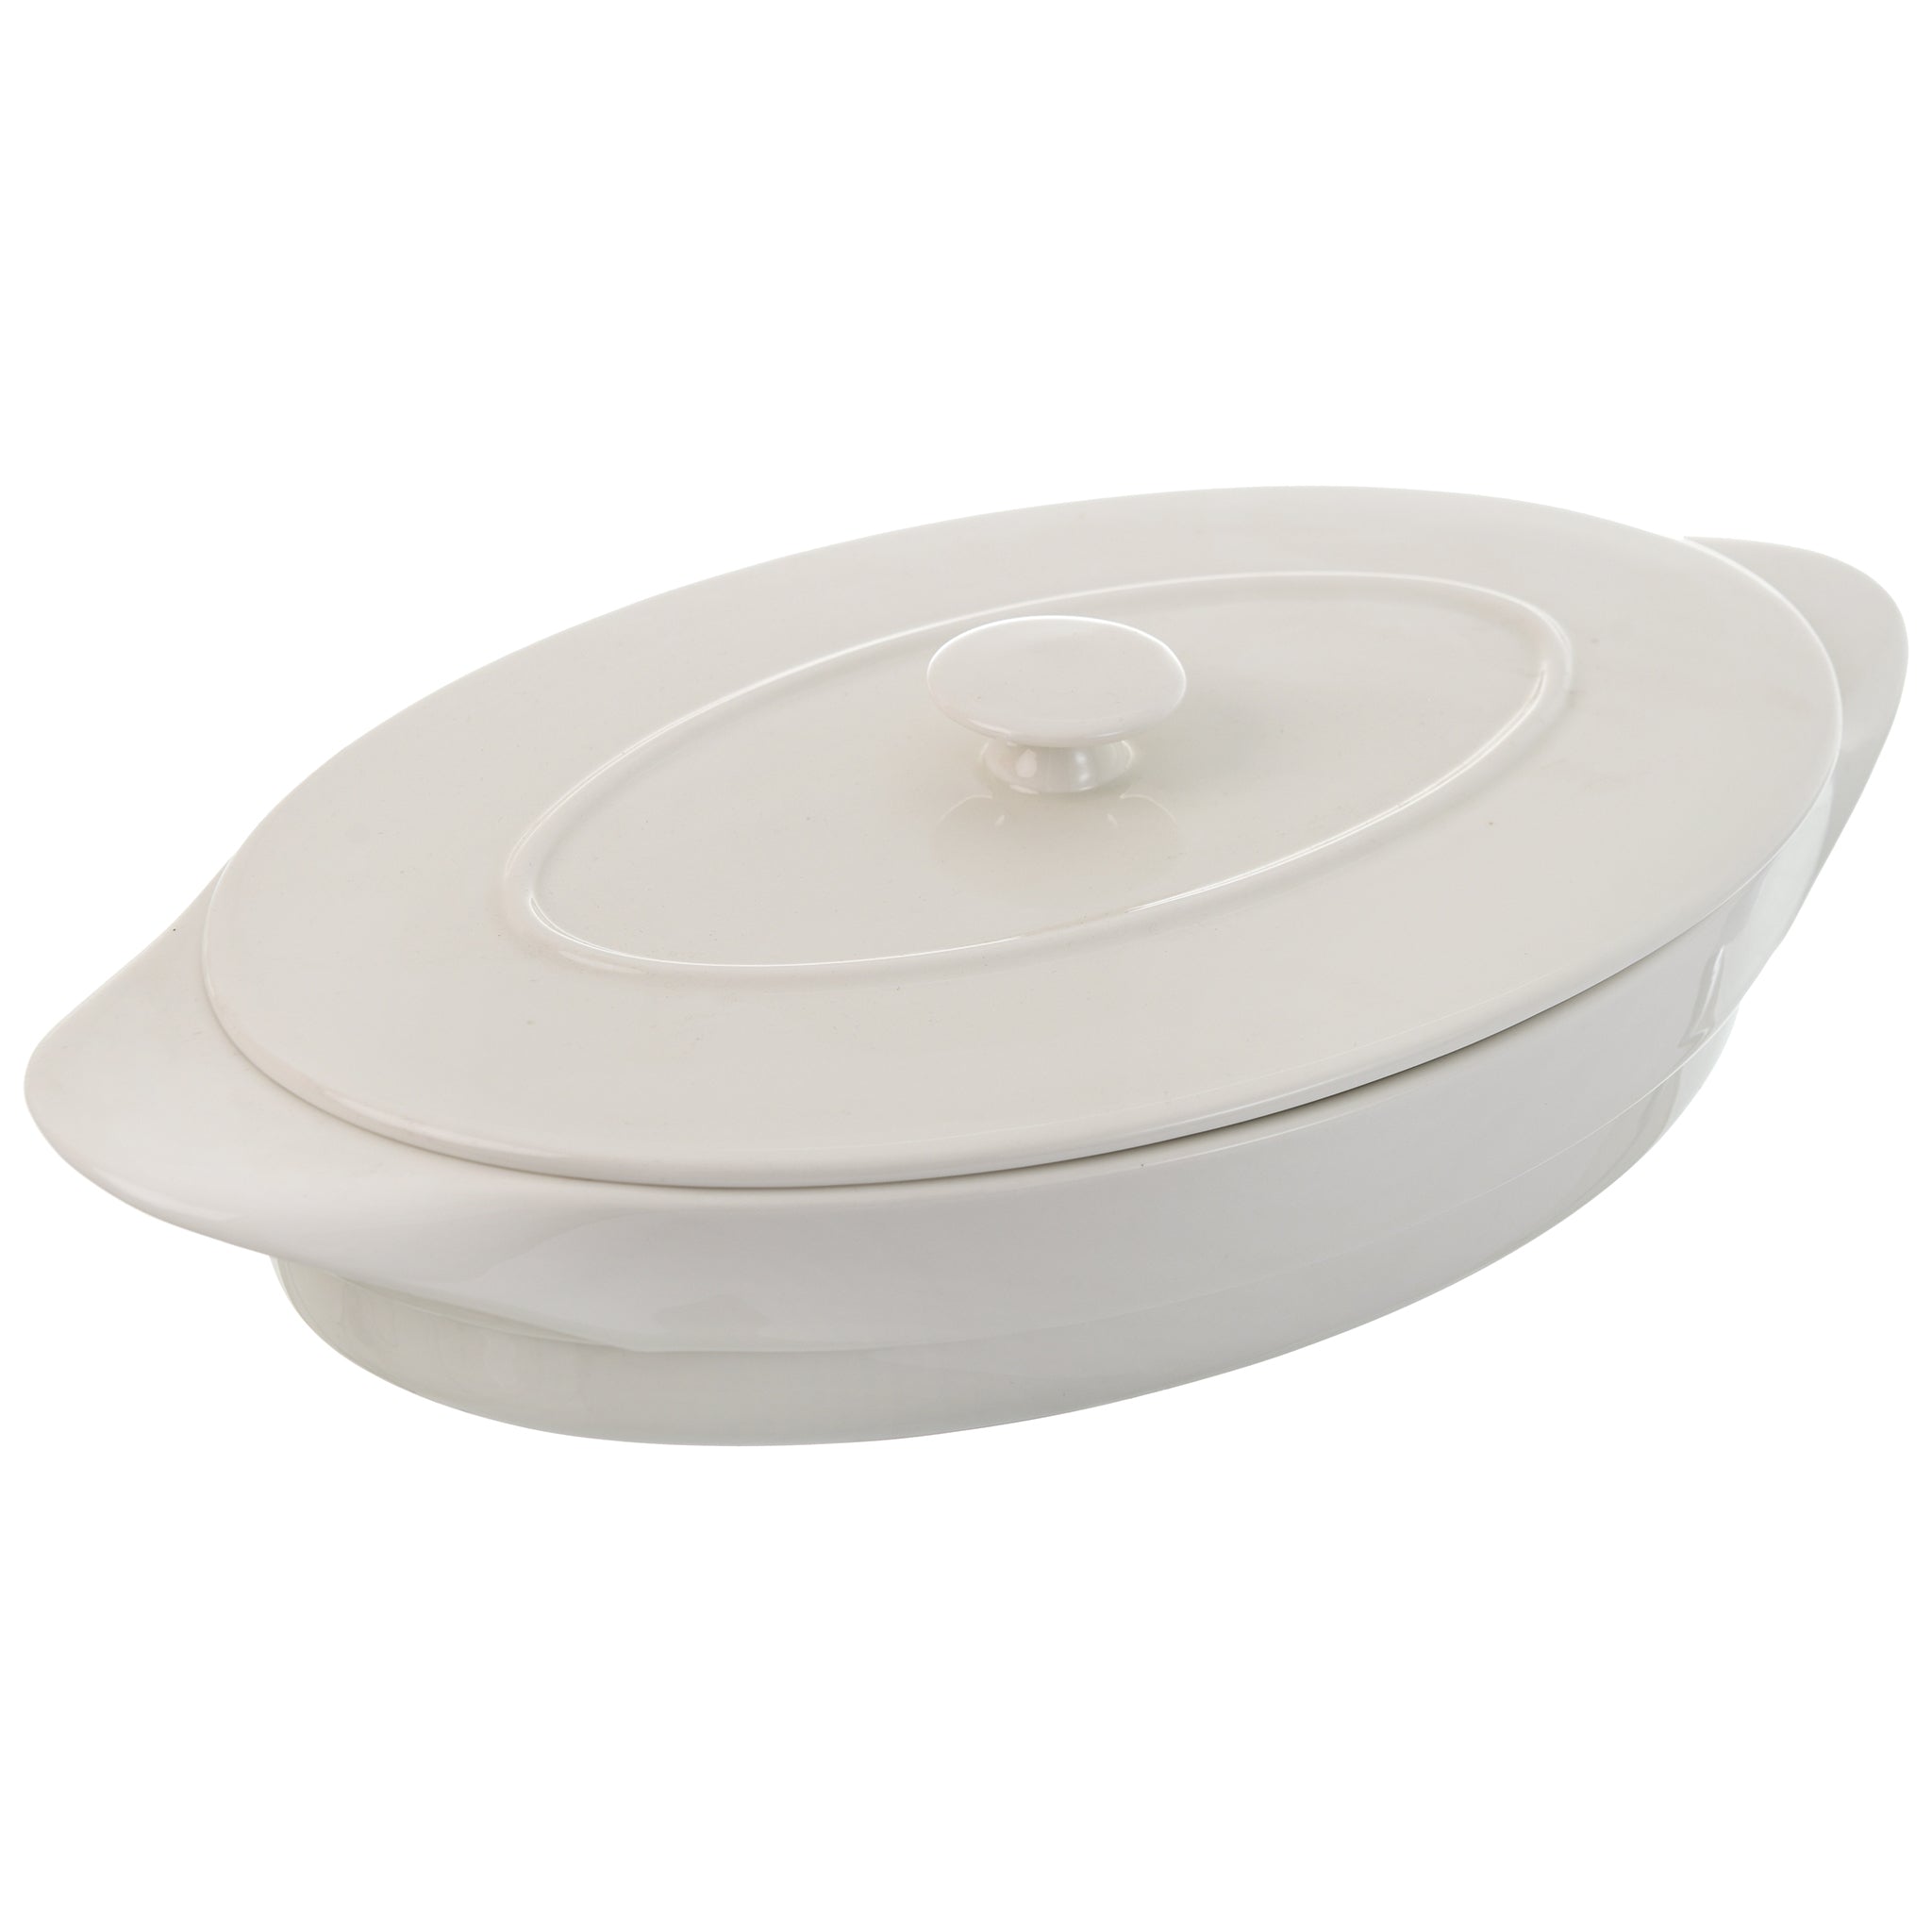 RAK - Covered Oval Food Warmer With Handles - 37.2x21x6cm - 770001128